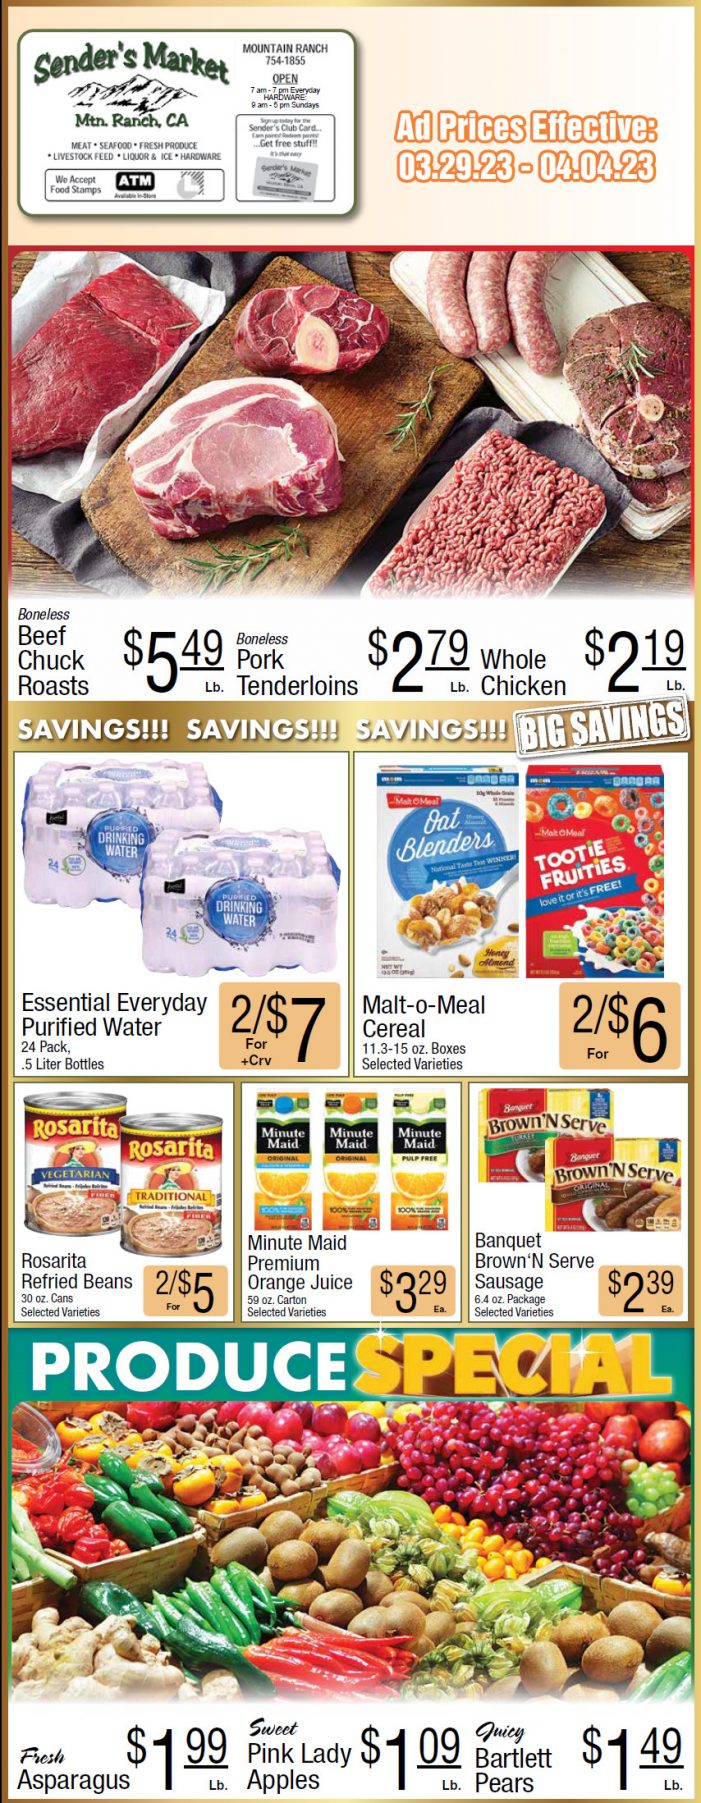 Sender’s Market Weekly Ad & Grocery Specials March 29 – April 4th! Shop Local & Save!!